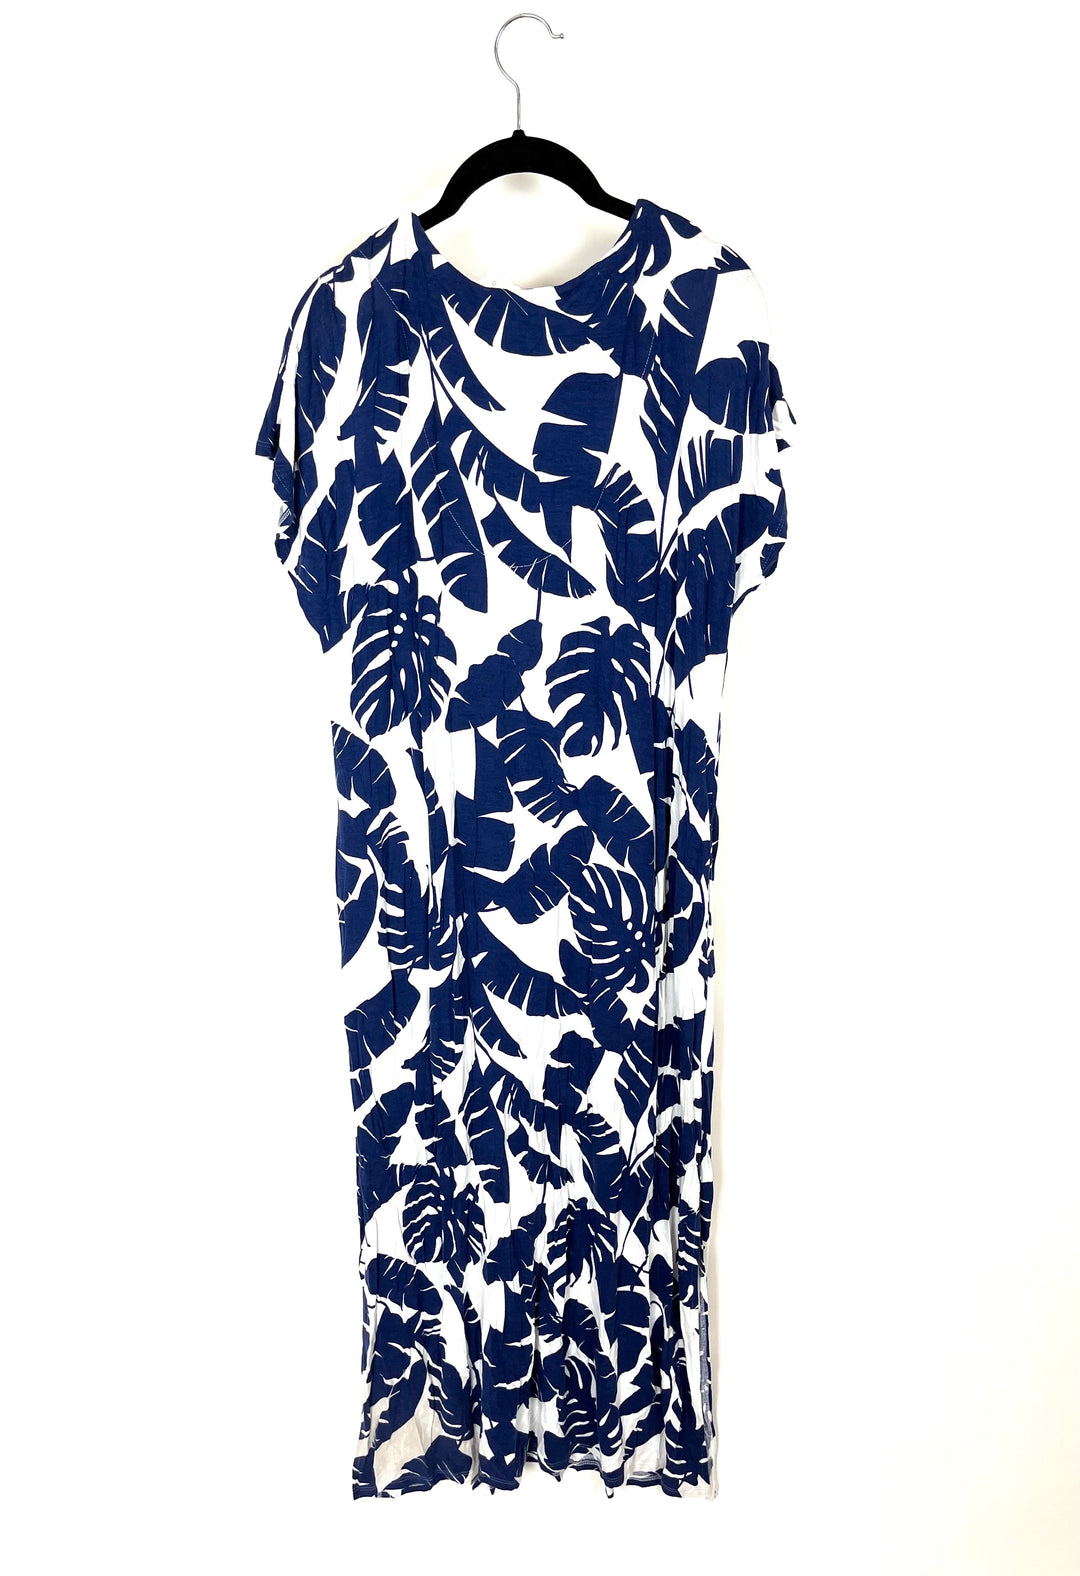 Navy Blue And White Tropical Dress - Small and Small/Medium